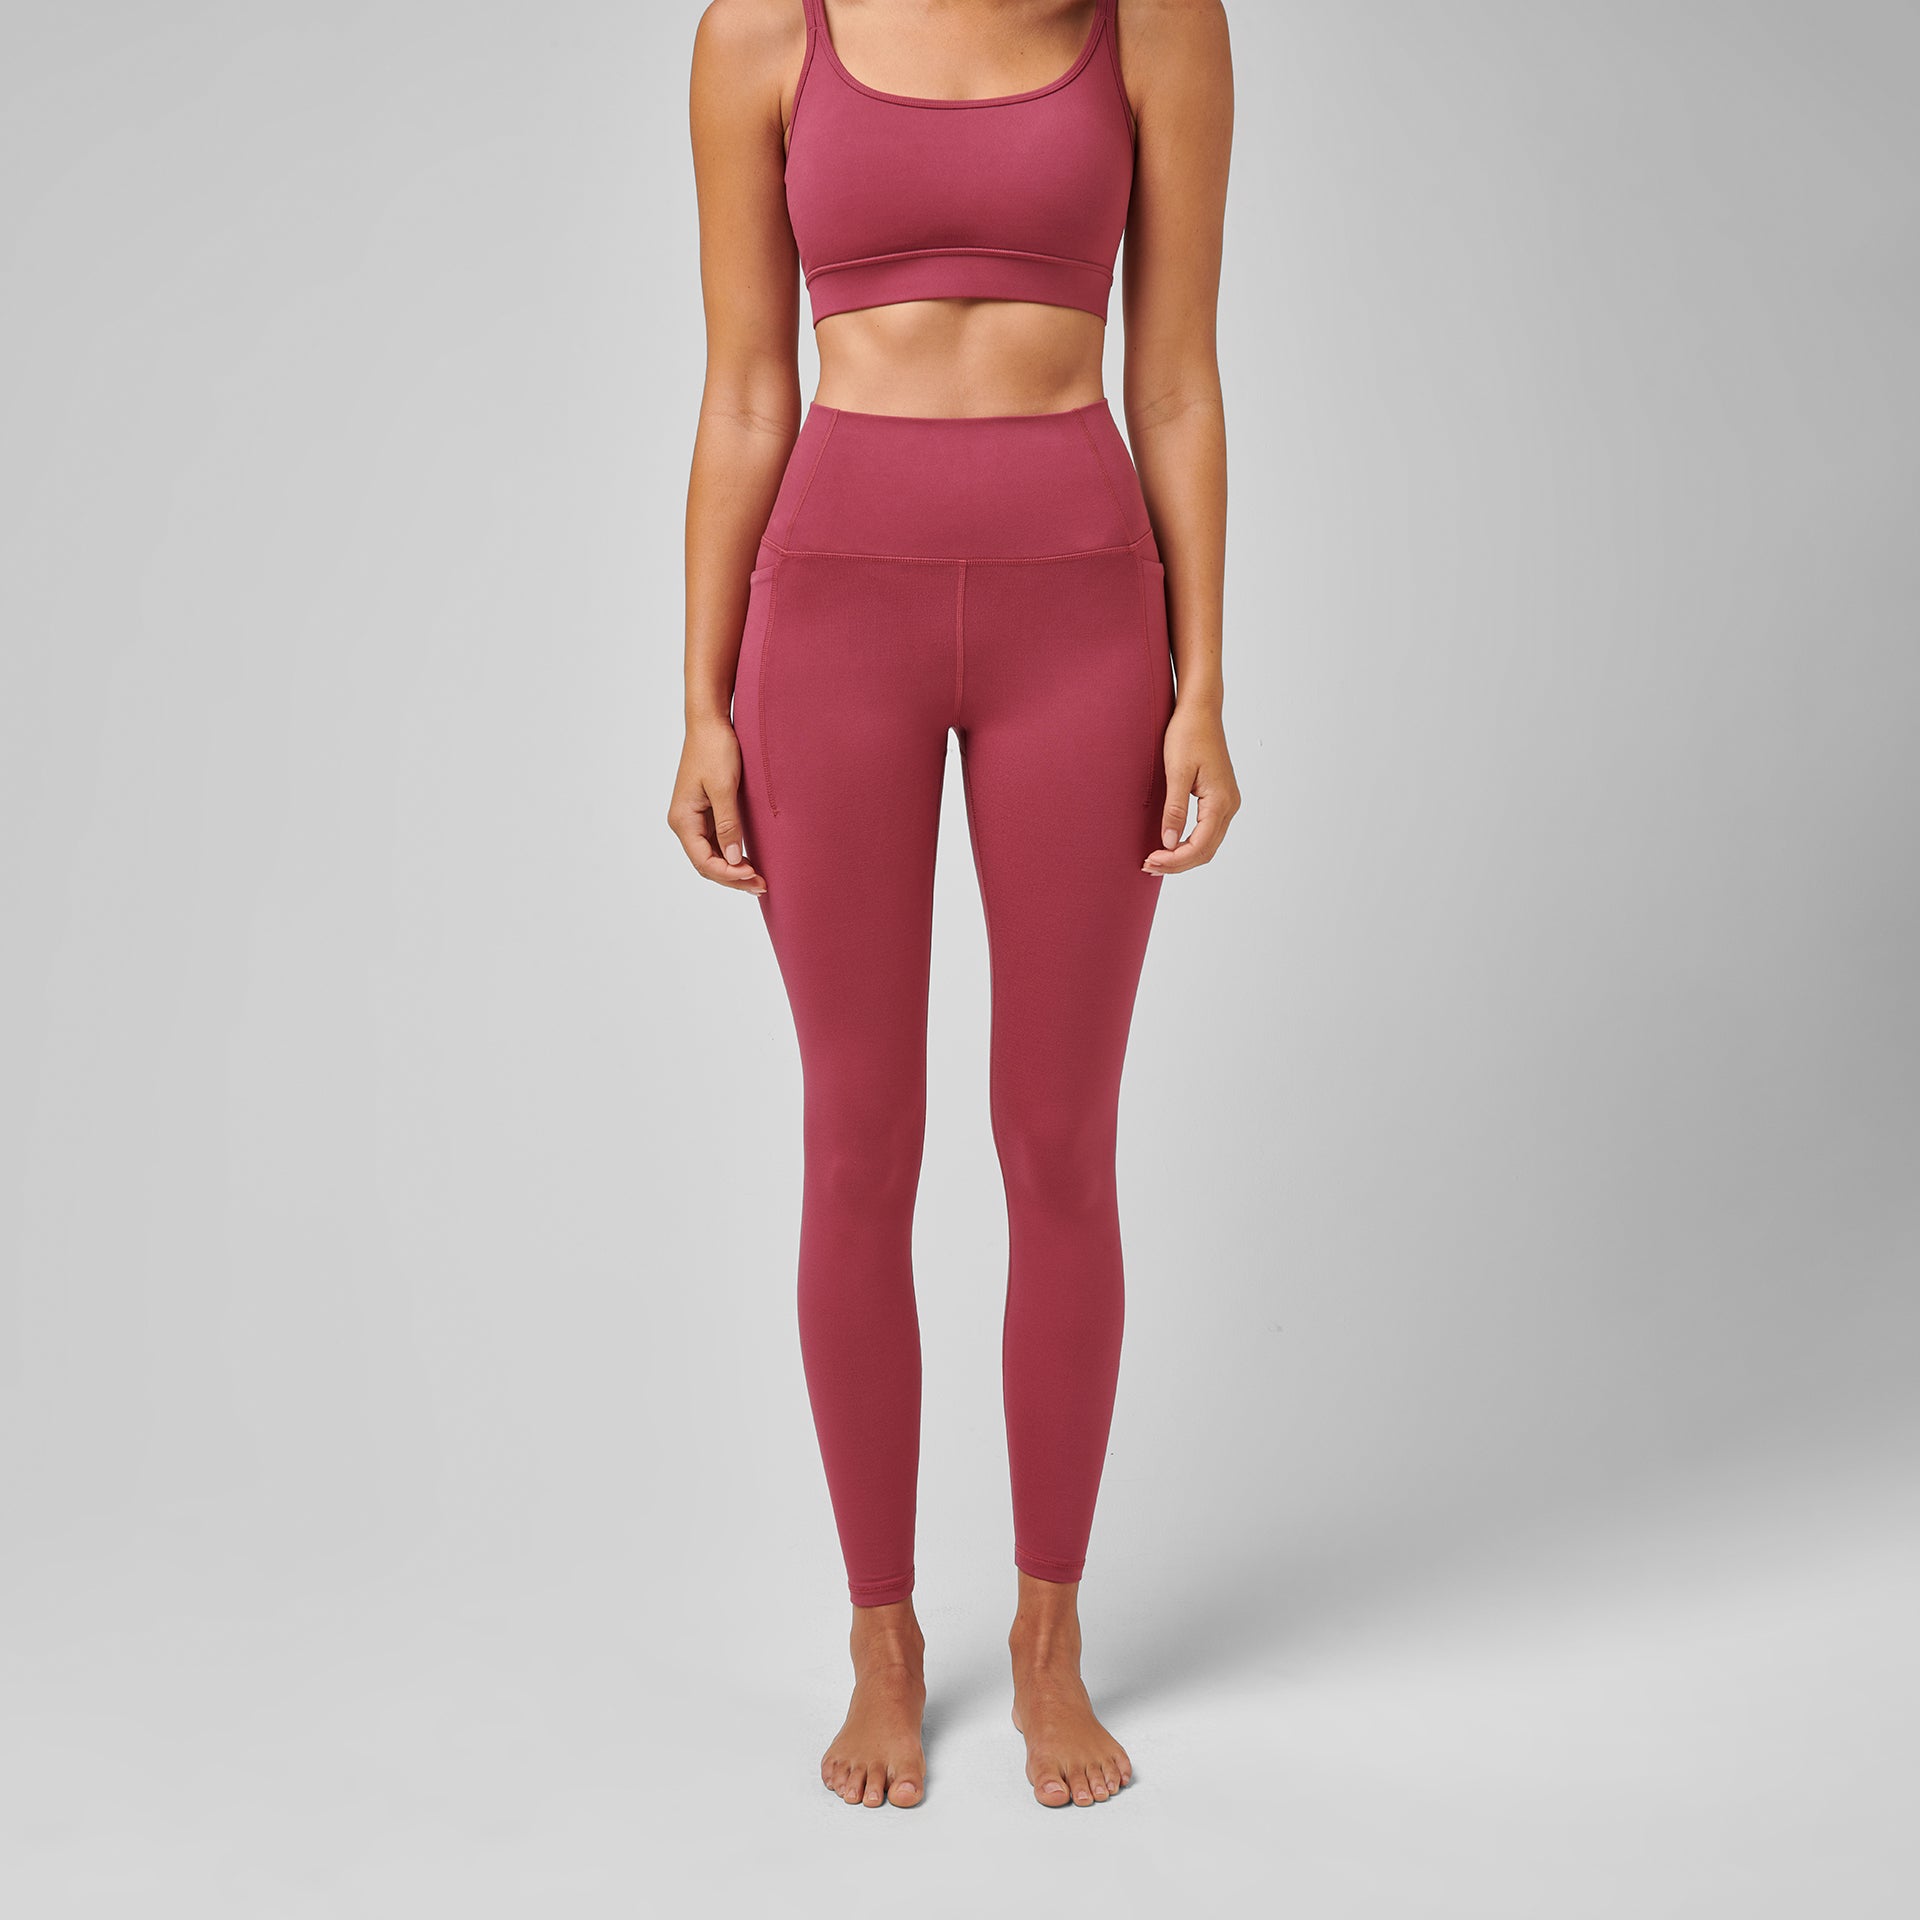 Me: please lululemon, give me the 25 or 23 deep fuchsia fast and